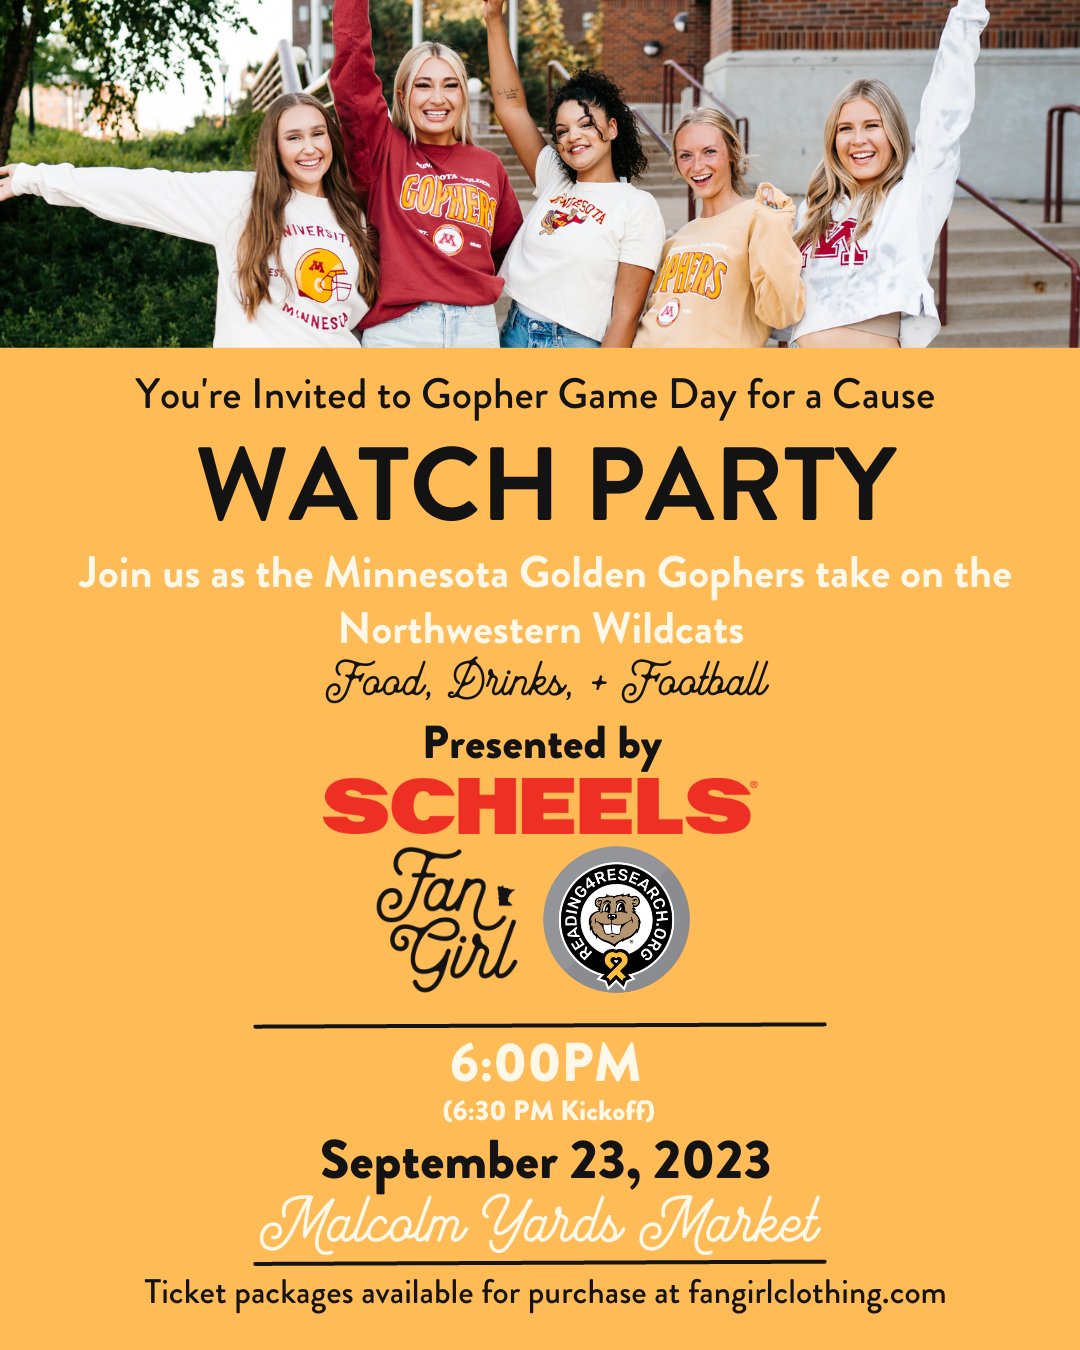 You're Invited to Gopher Game Day for a Cause with FAN GIRL! - Fan Girl Clothing